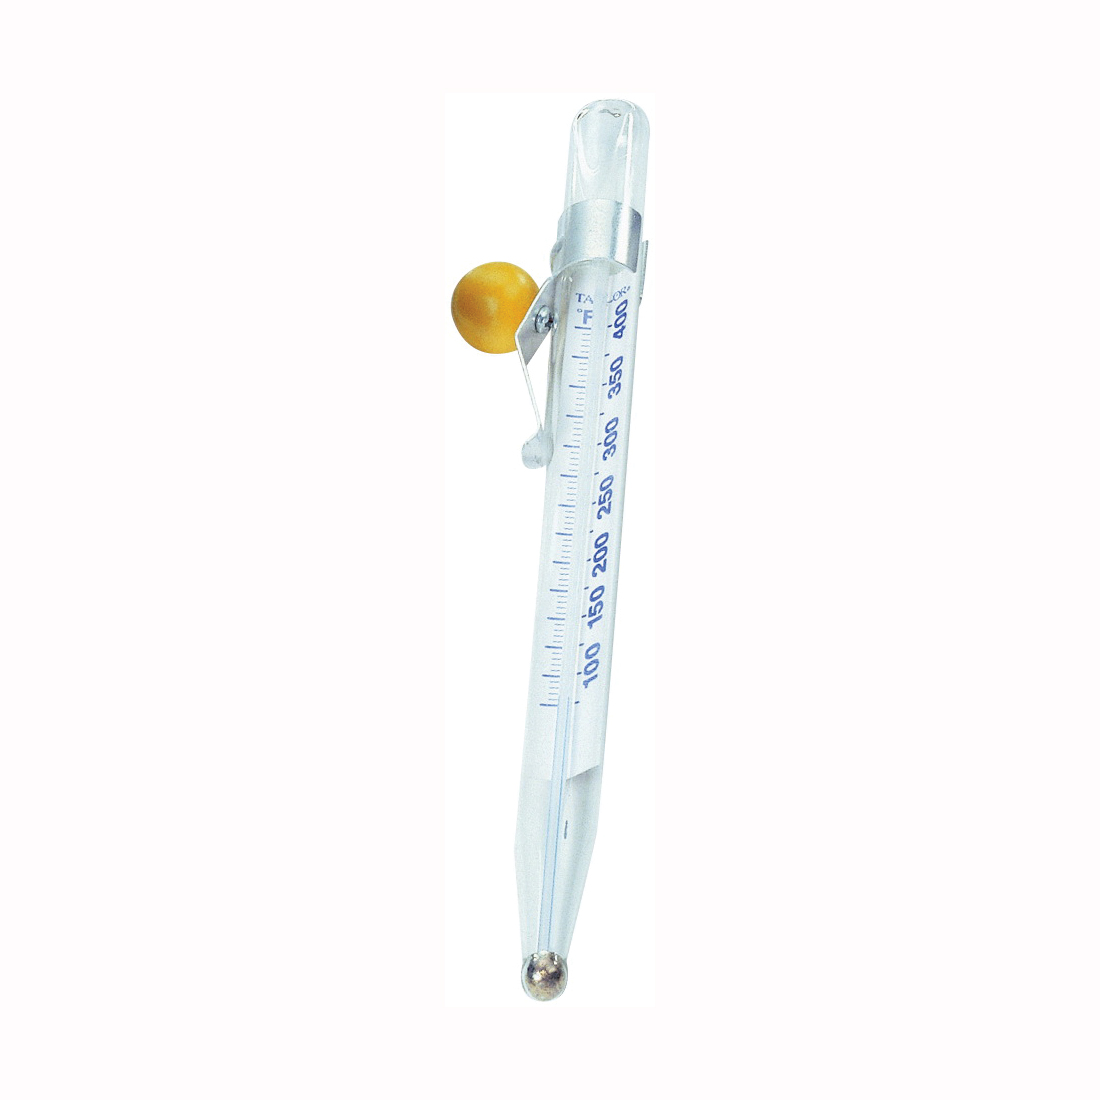 Candy/Deep Fry Thermometer, 3505